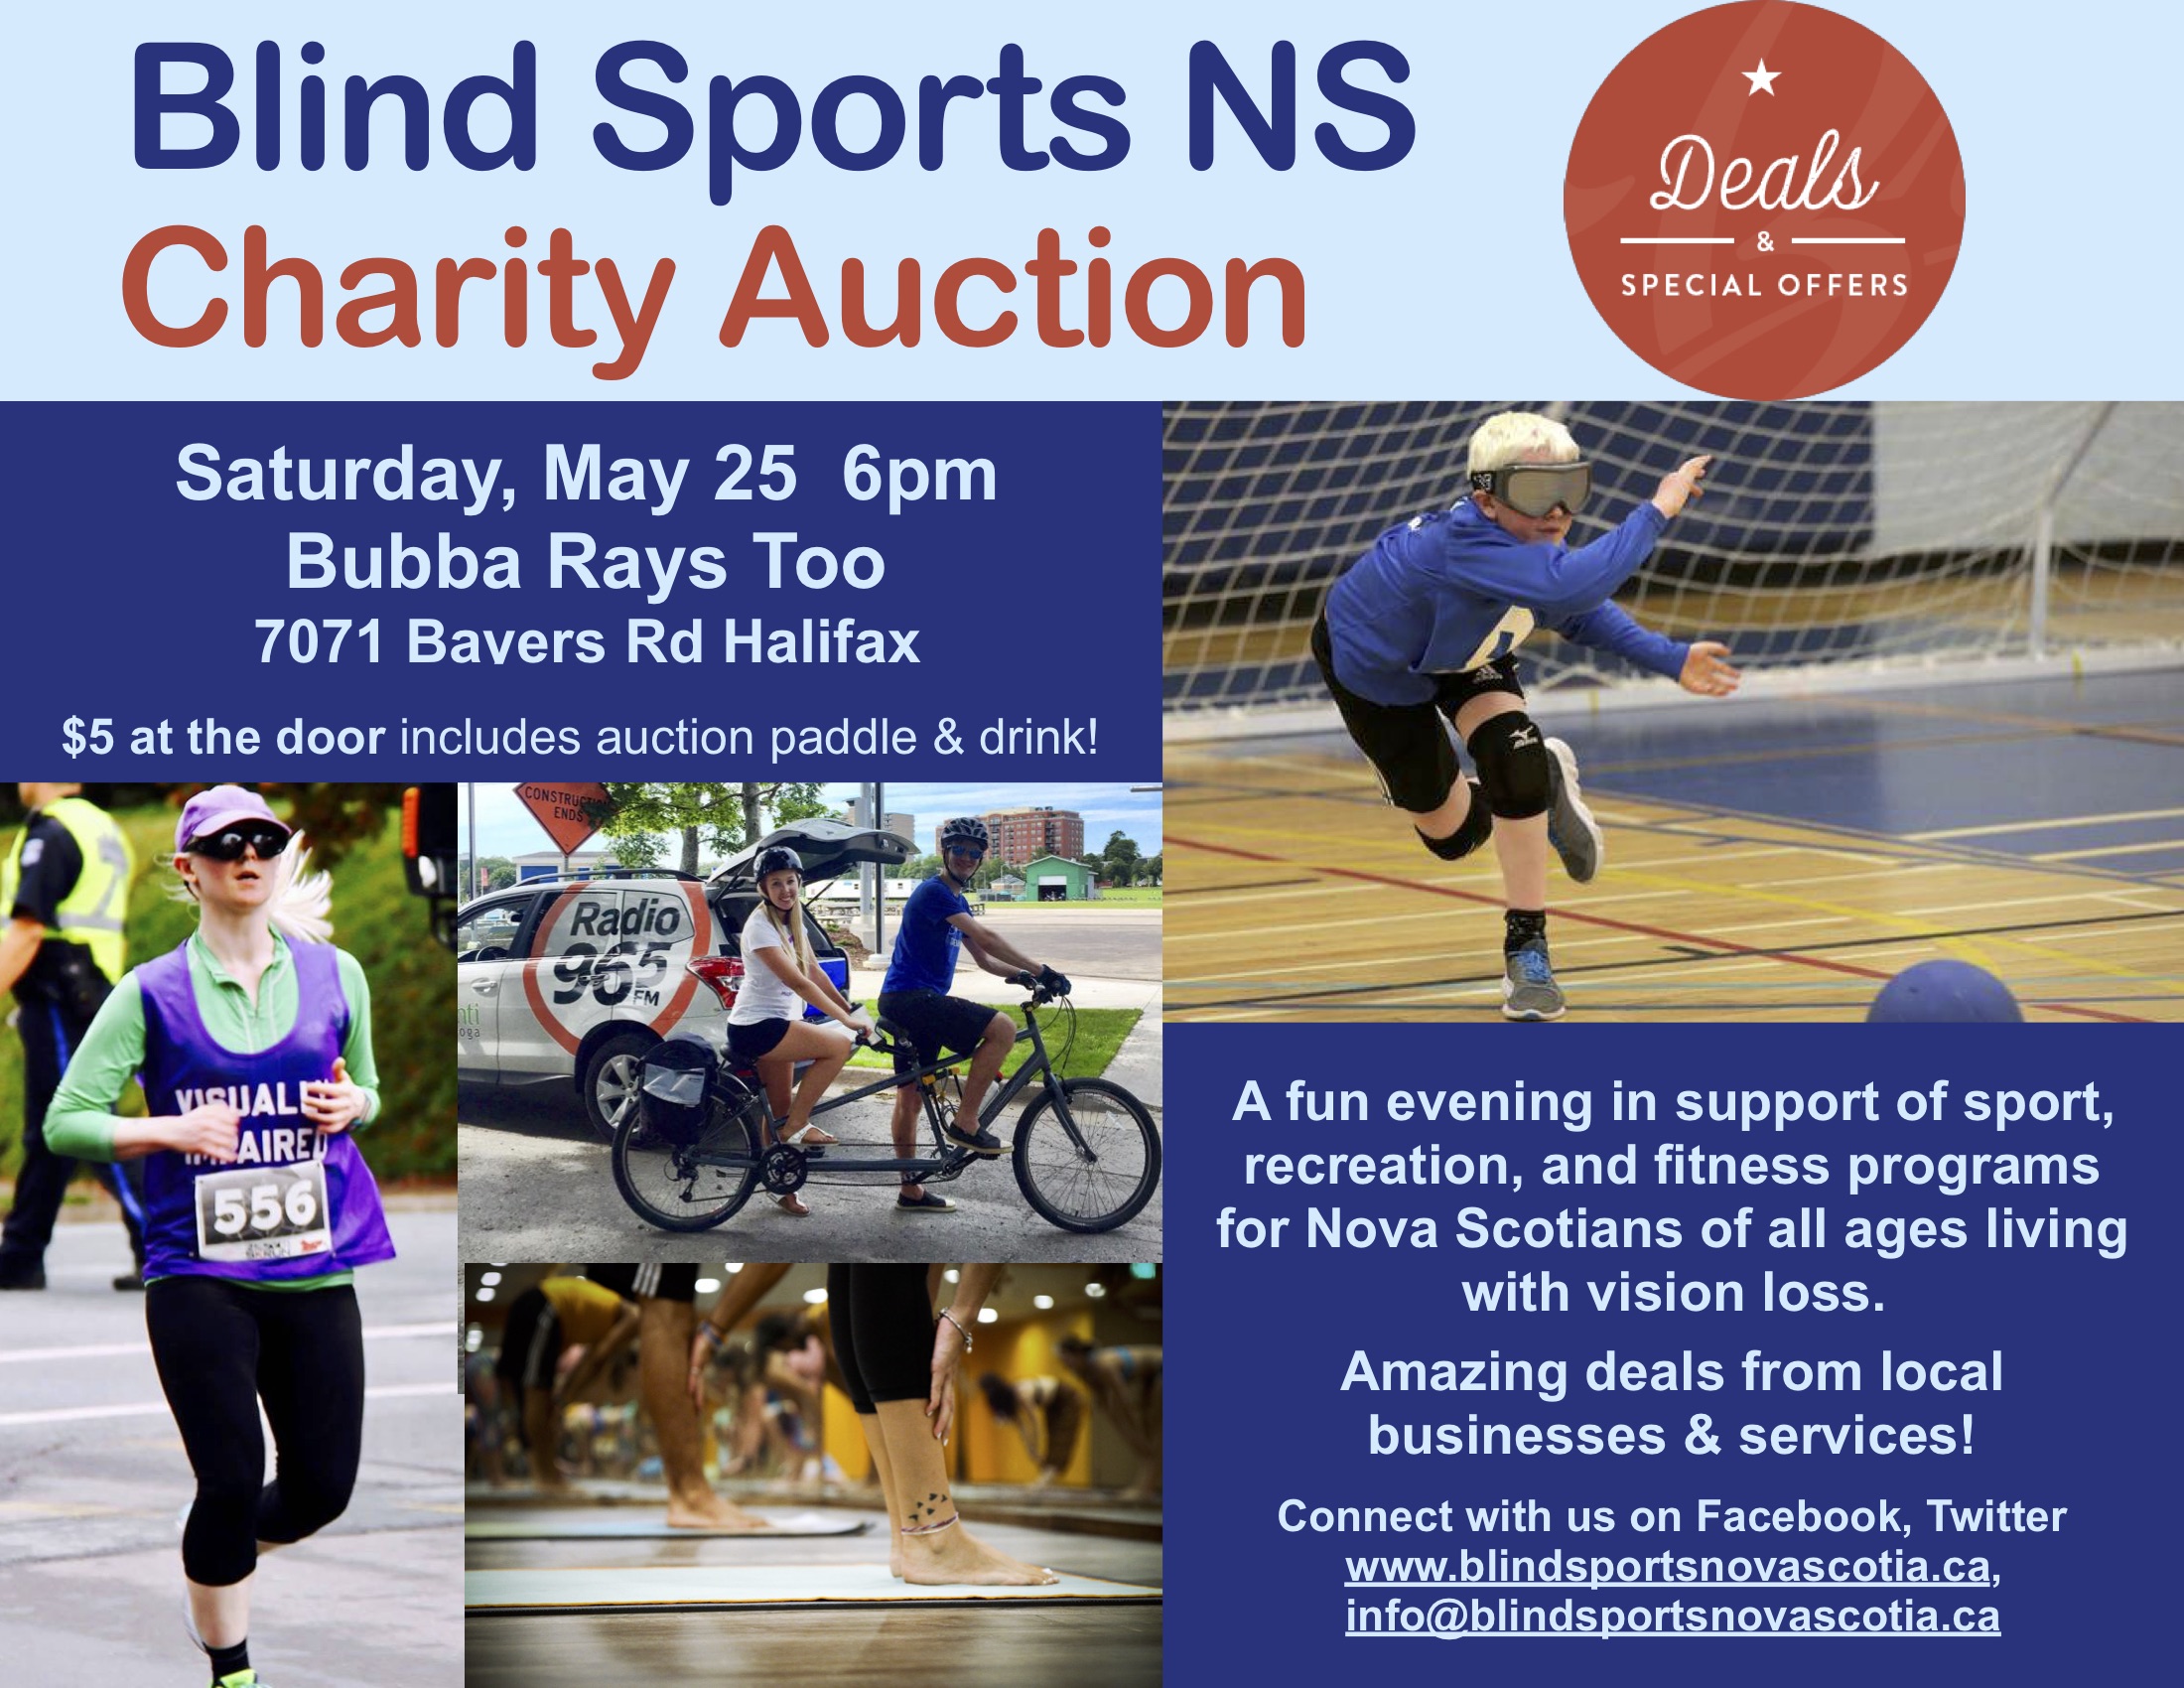 Pictured on the poster are: "Deals & special offers". A blonde woman running in a vest that reads "visually impaired", a pair on a tandem bike outdoors, a young goal ball player in eyeshades, and a group of ankles & feet in a fog class.  Blind Sports NS Charity Auction Saturday, May 25 6pm Bubba Rays Too 7071 Bayers Rd Halifax $5 at the door includes auction paddle & drink! A fun evening in support of sport, recreation, and fitness programs for Nova Scotians of all ages living with vision loss. Amazing deals from local businesses & services! Connect with us on Facebook, Twitter www.blindsportsnovascotia.ca, info@blindsportsnovascotia.ca